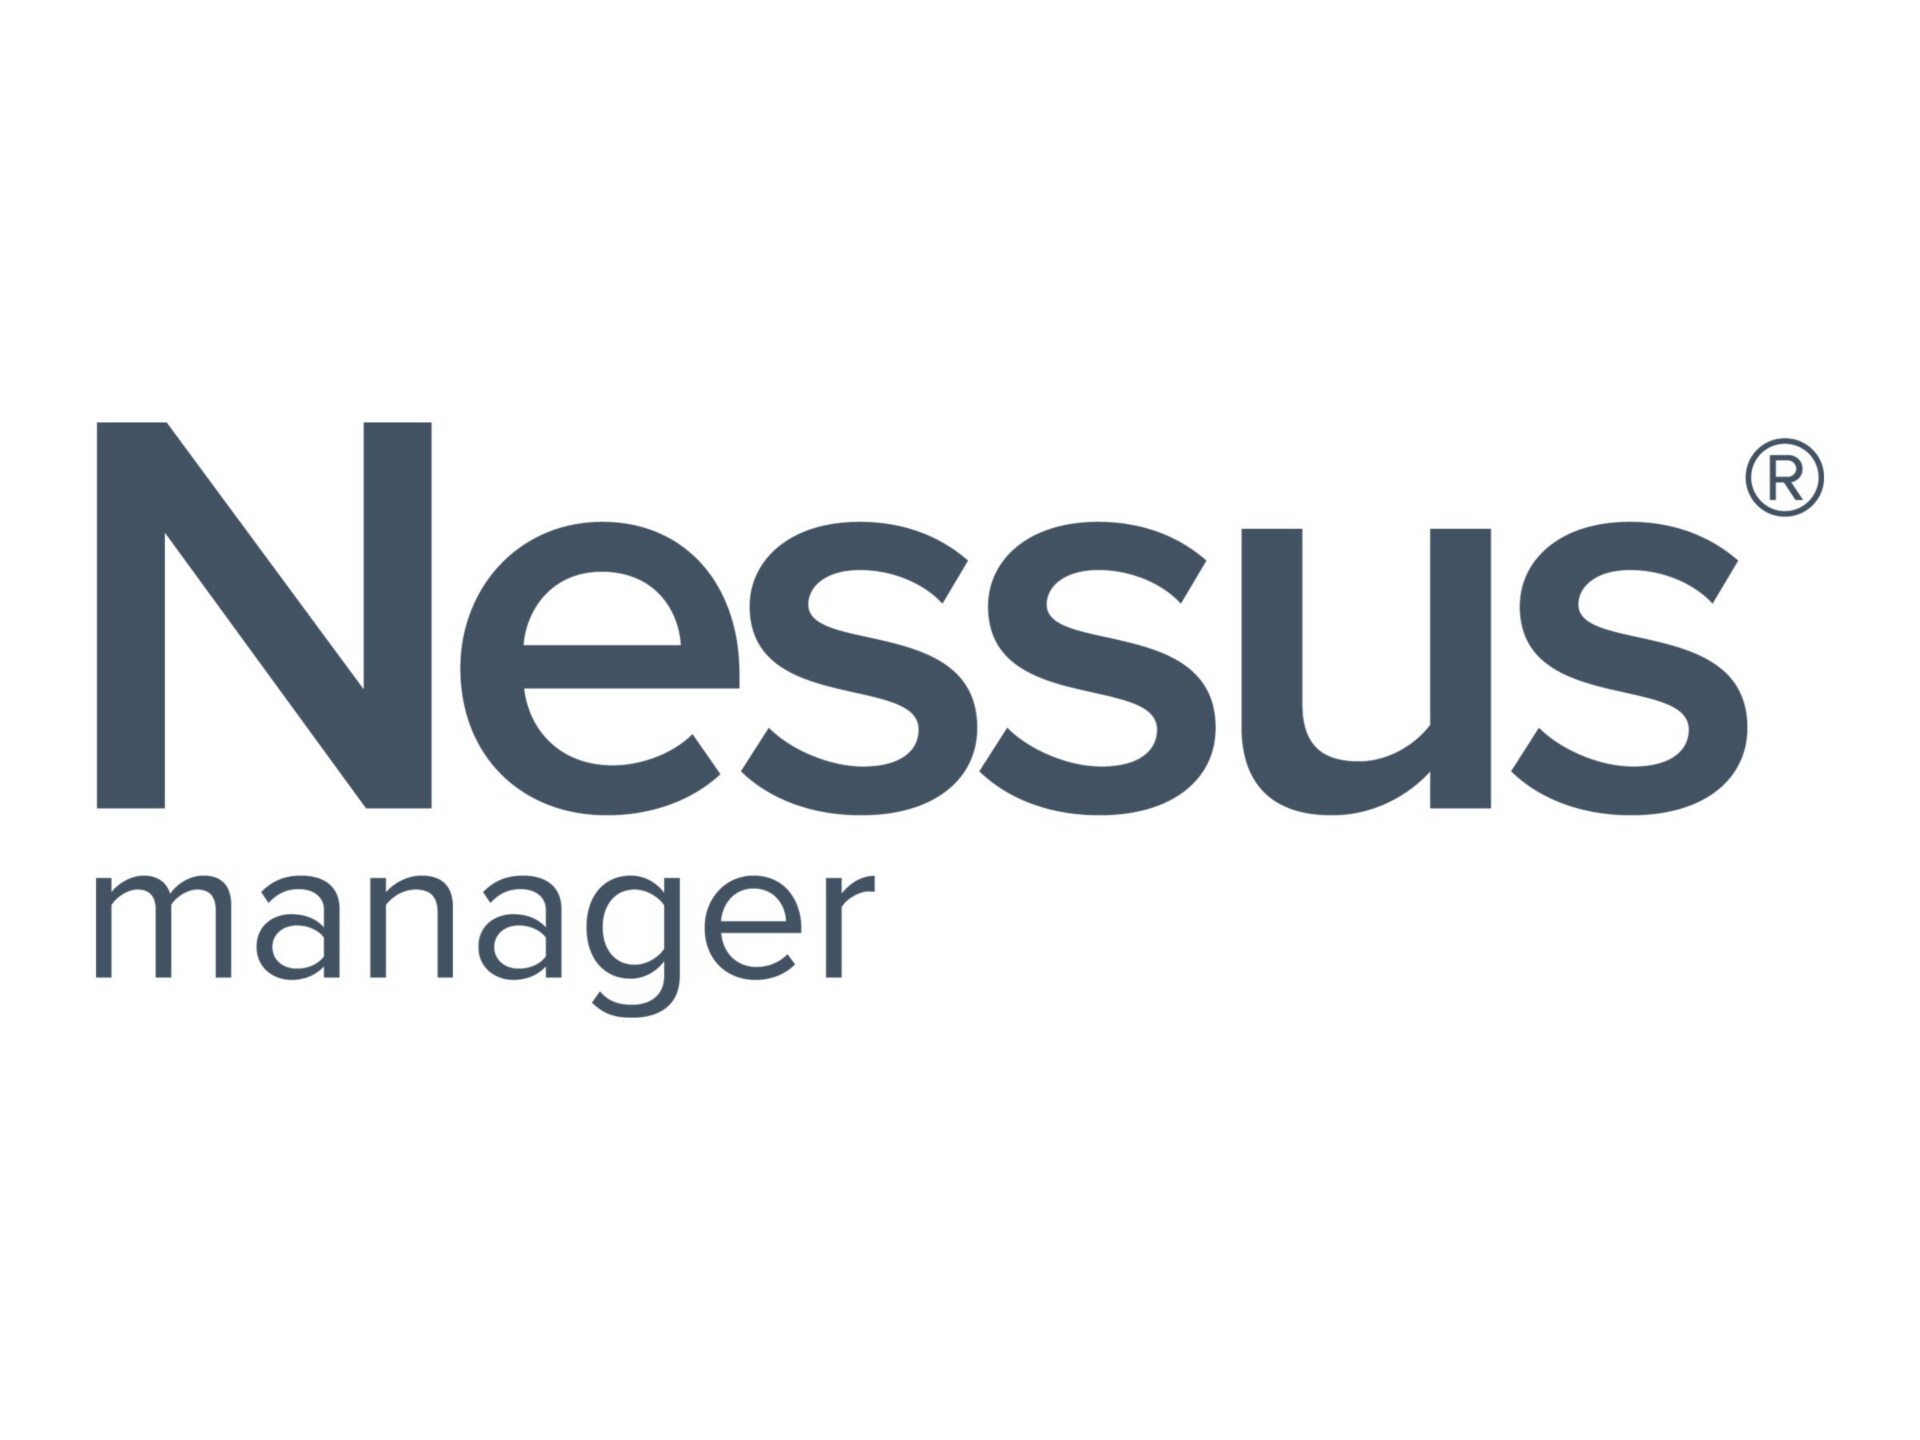 Nessus Manager - On-Premise subscription license renewal (1 year) - 1024 hosts, 1024 agents, 4 additional scanners